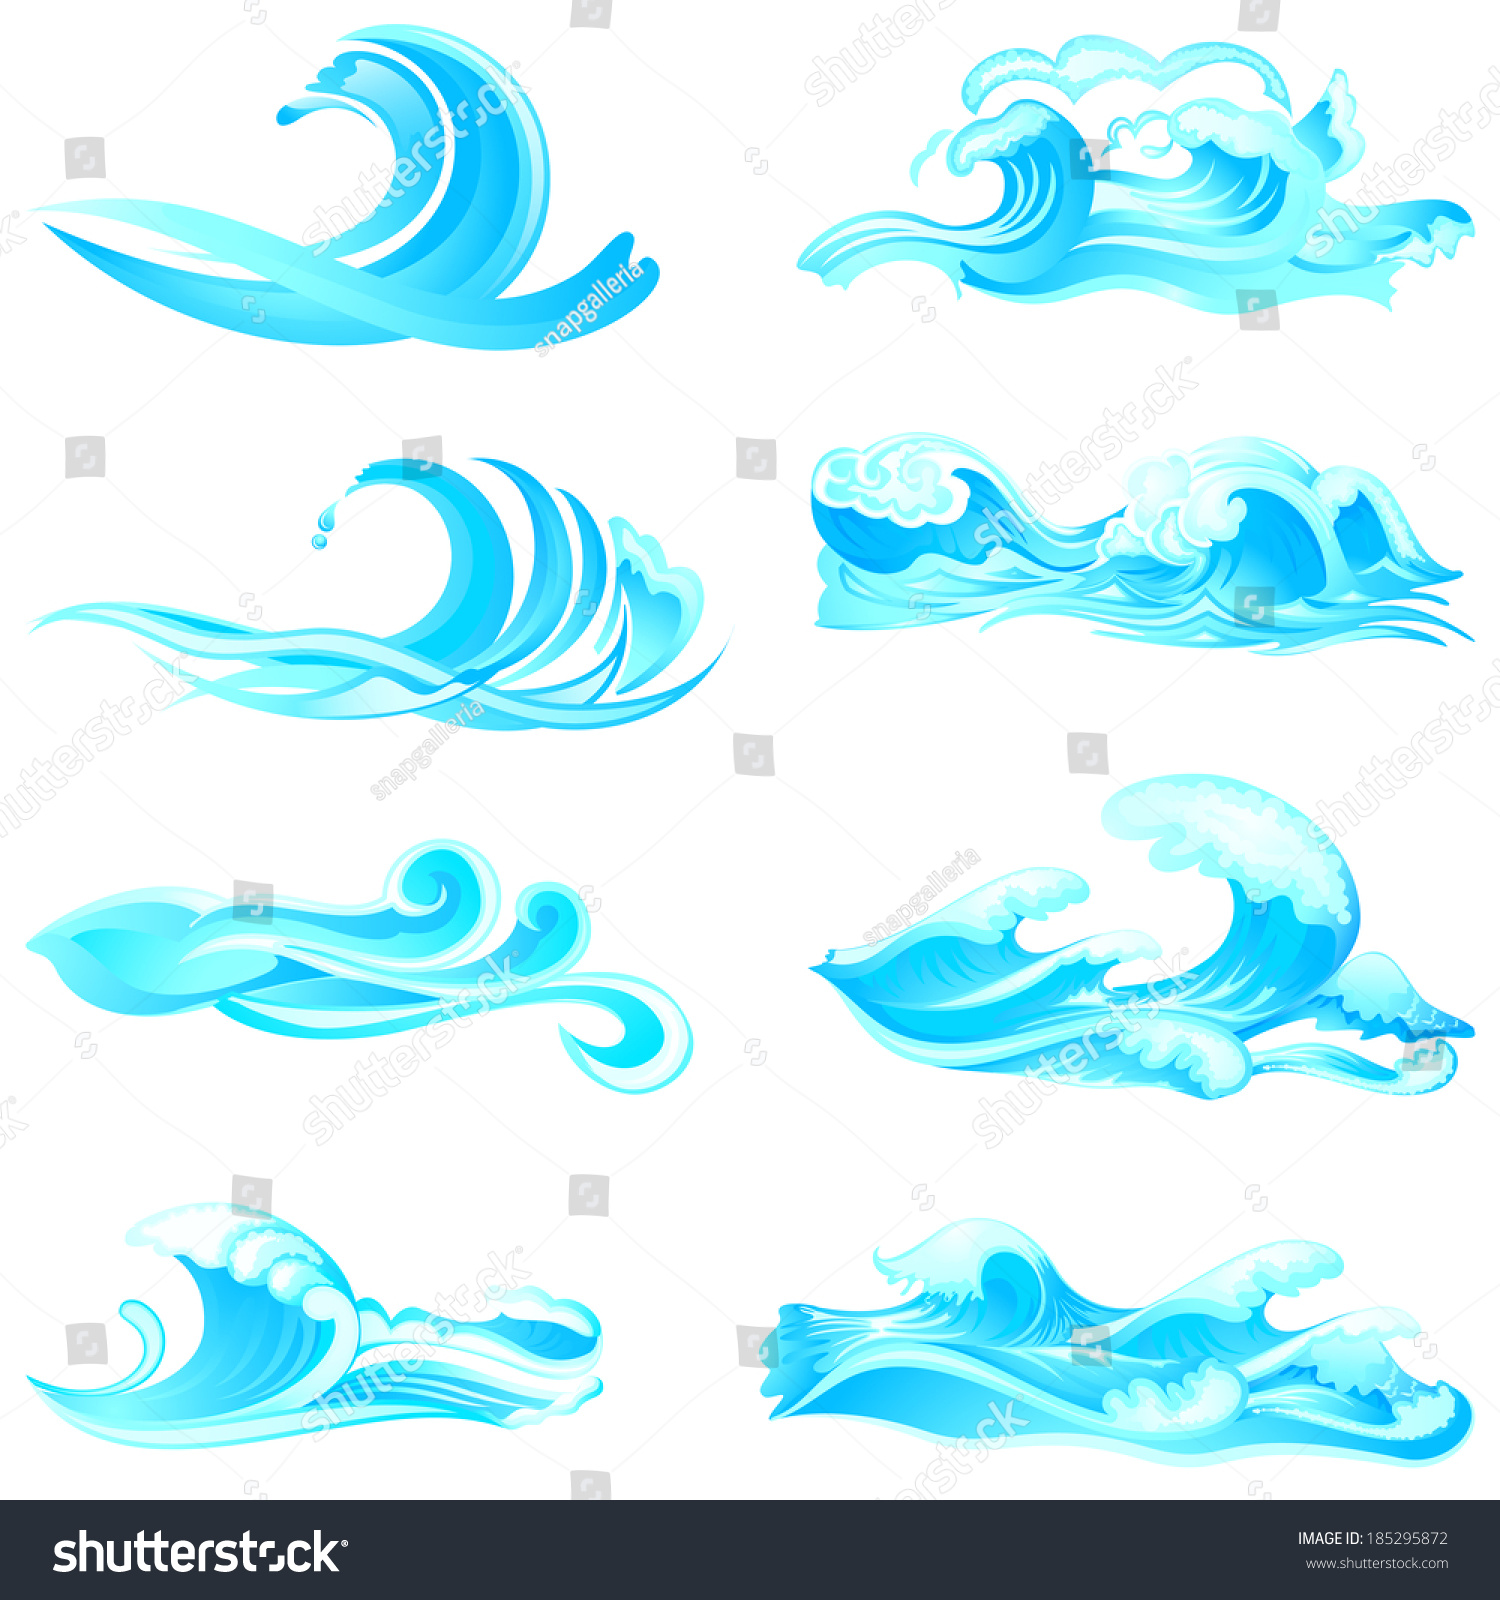 Download Easy Edit Vector Illustration Waves Collection Stock ...